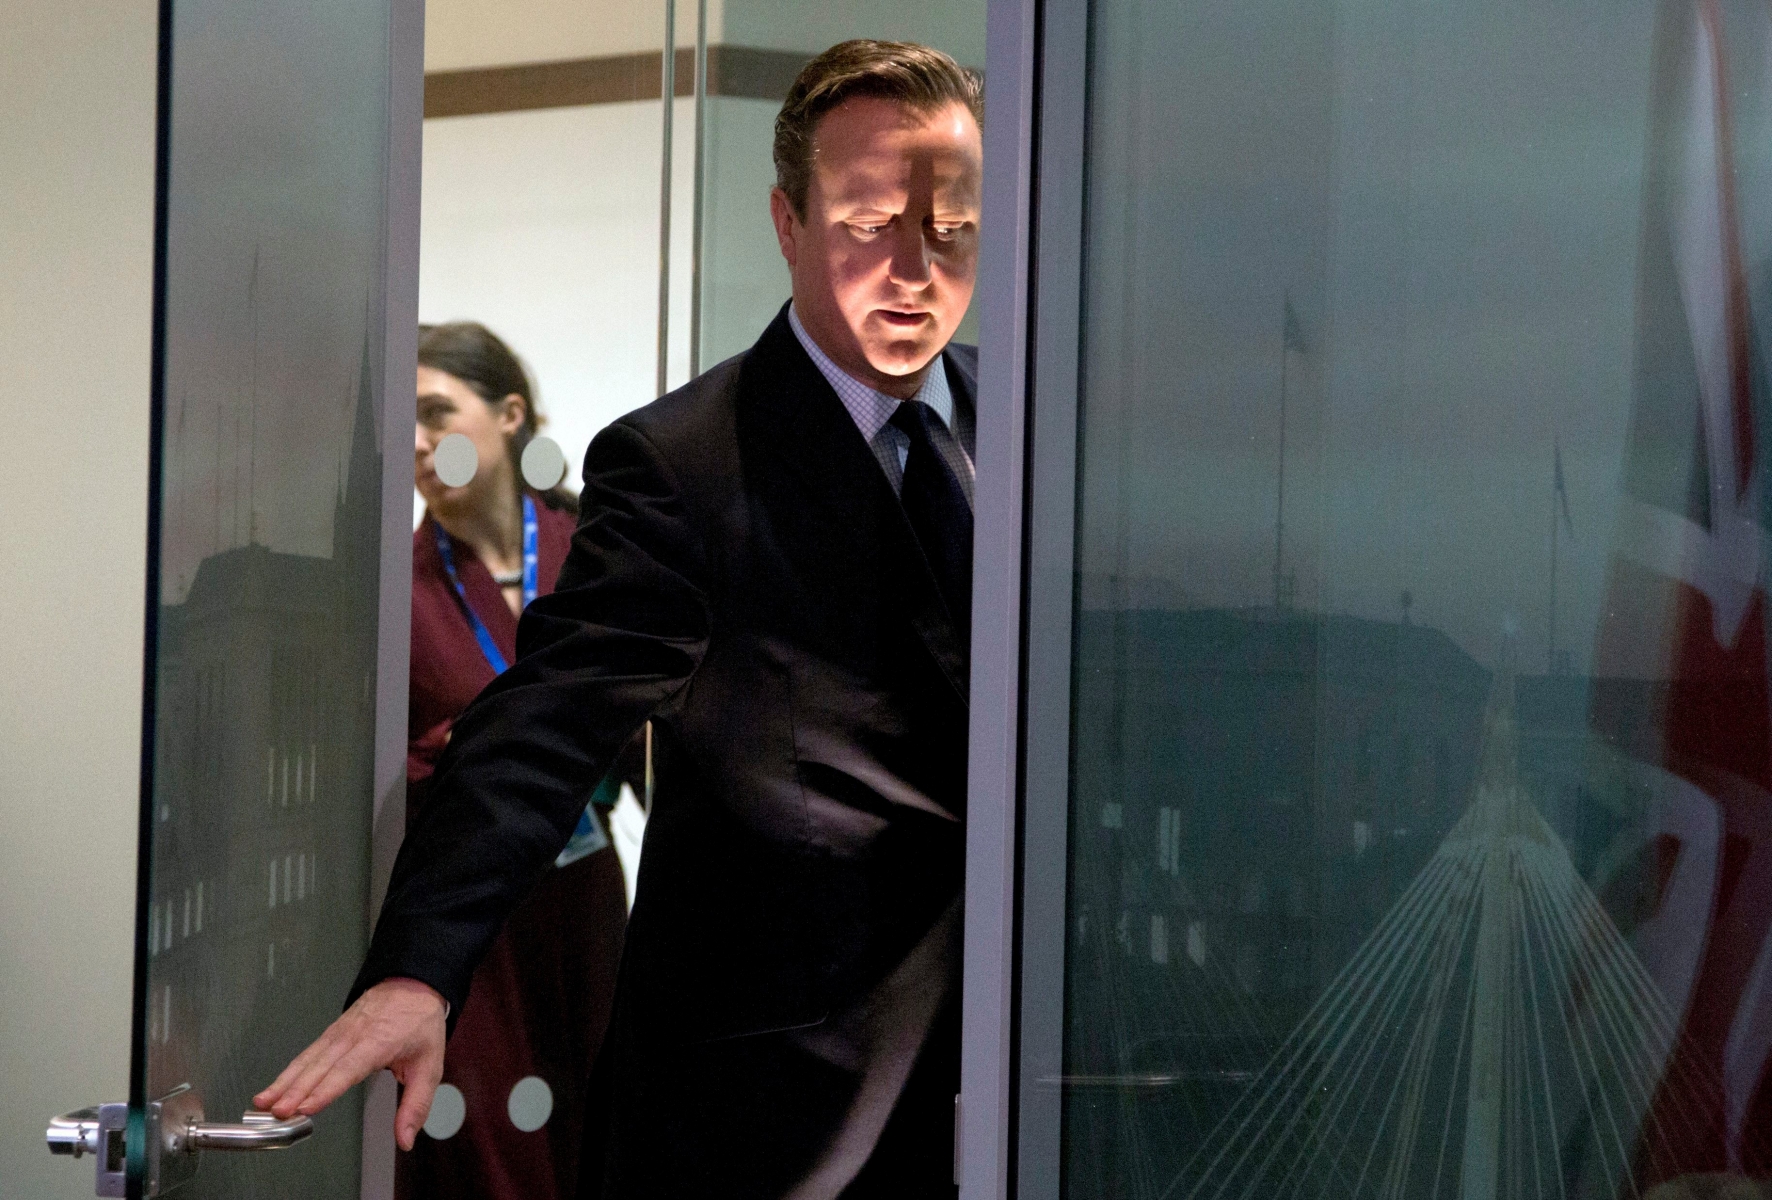 epa05073622 British Prime Minister David Cameron (R) opens the door to a meeting room as he prepares to greet Hungarian Prime Minister Viktor Orban on the sidelines of an EU summit in Brussels, Belgium, 18 December 2015. EU leaders met in Brussels for the year-end summit with highly controversial British demands for reforms expected to be discussed. Sanctions against Russia, Europe's migration crisis, the fight against terrorism and the crisis in Syria were also expected to round out the agenda of the two-days summit on 17 and 18 December.  EPA/VIRGINIA MAYO/POOL BELGIUM EU SUMMIT